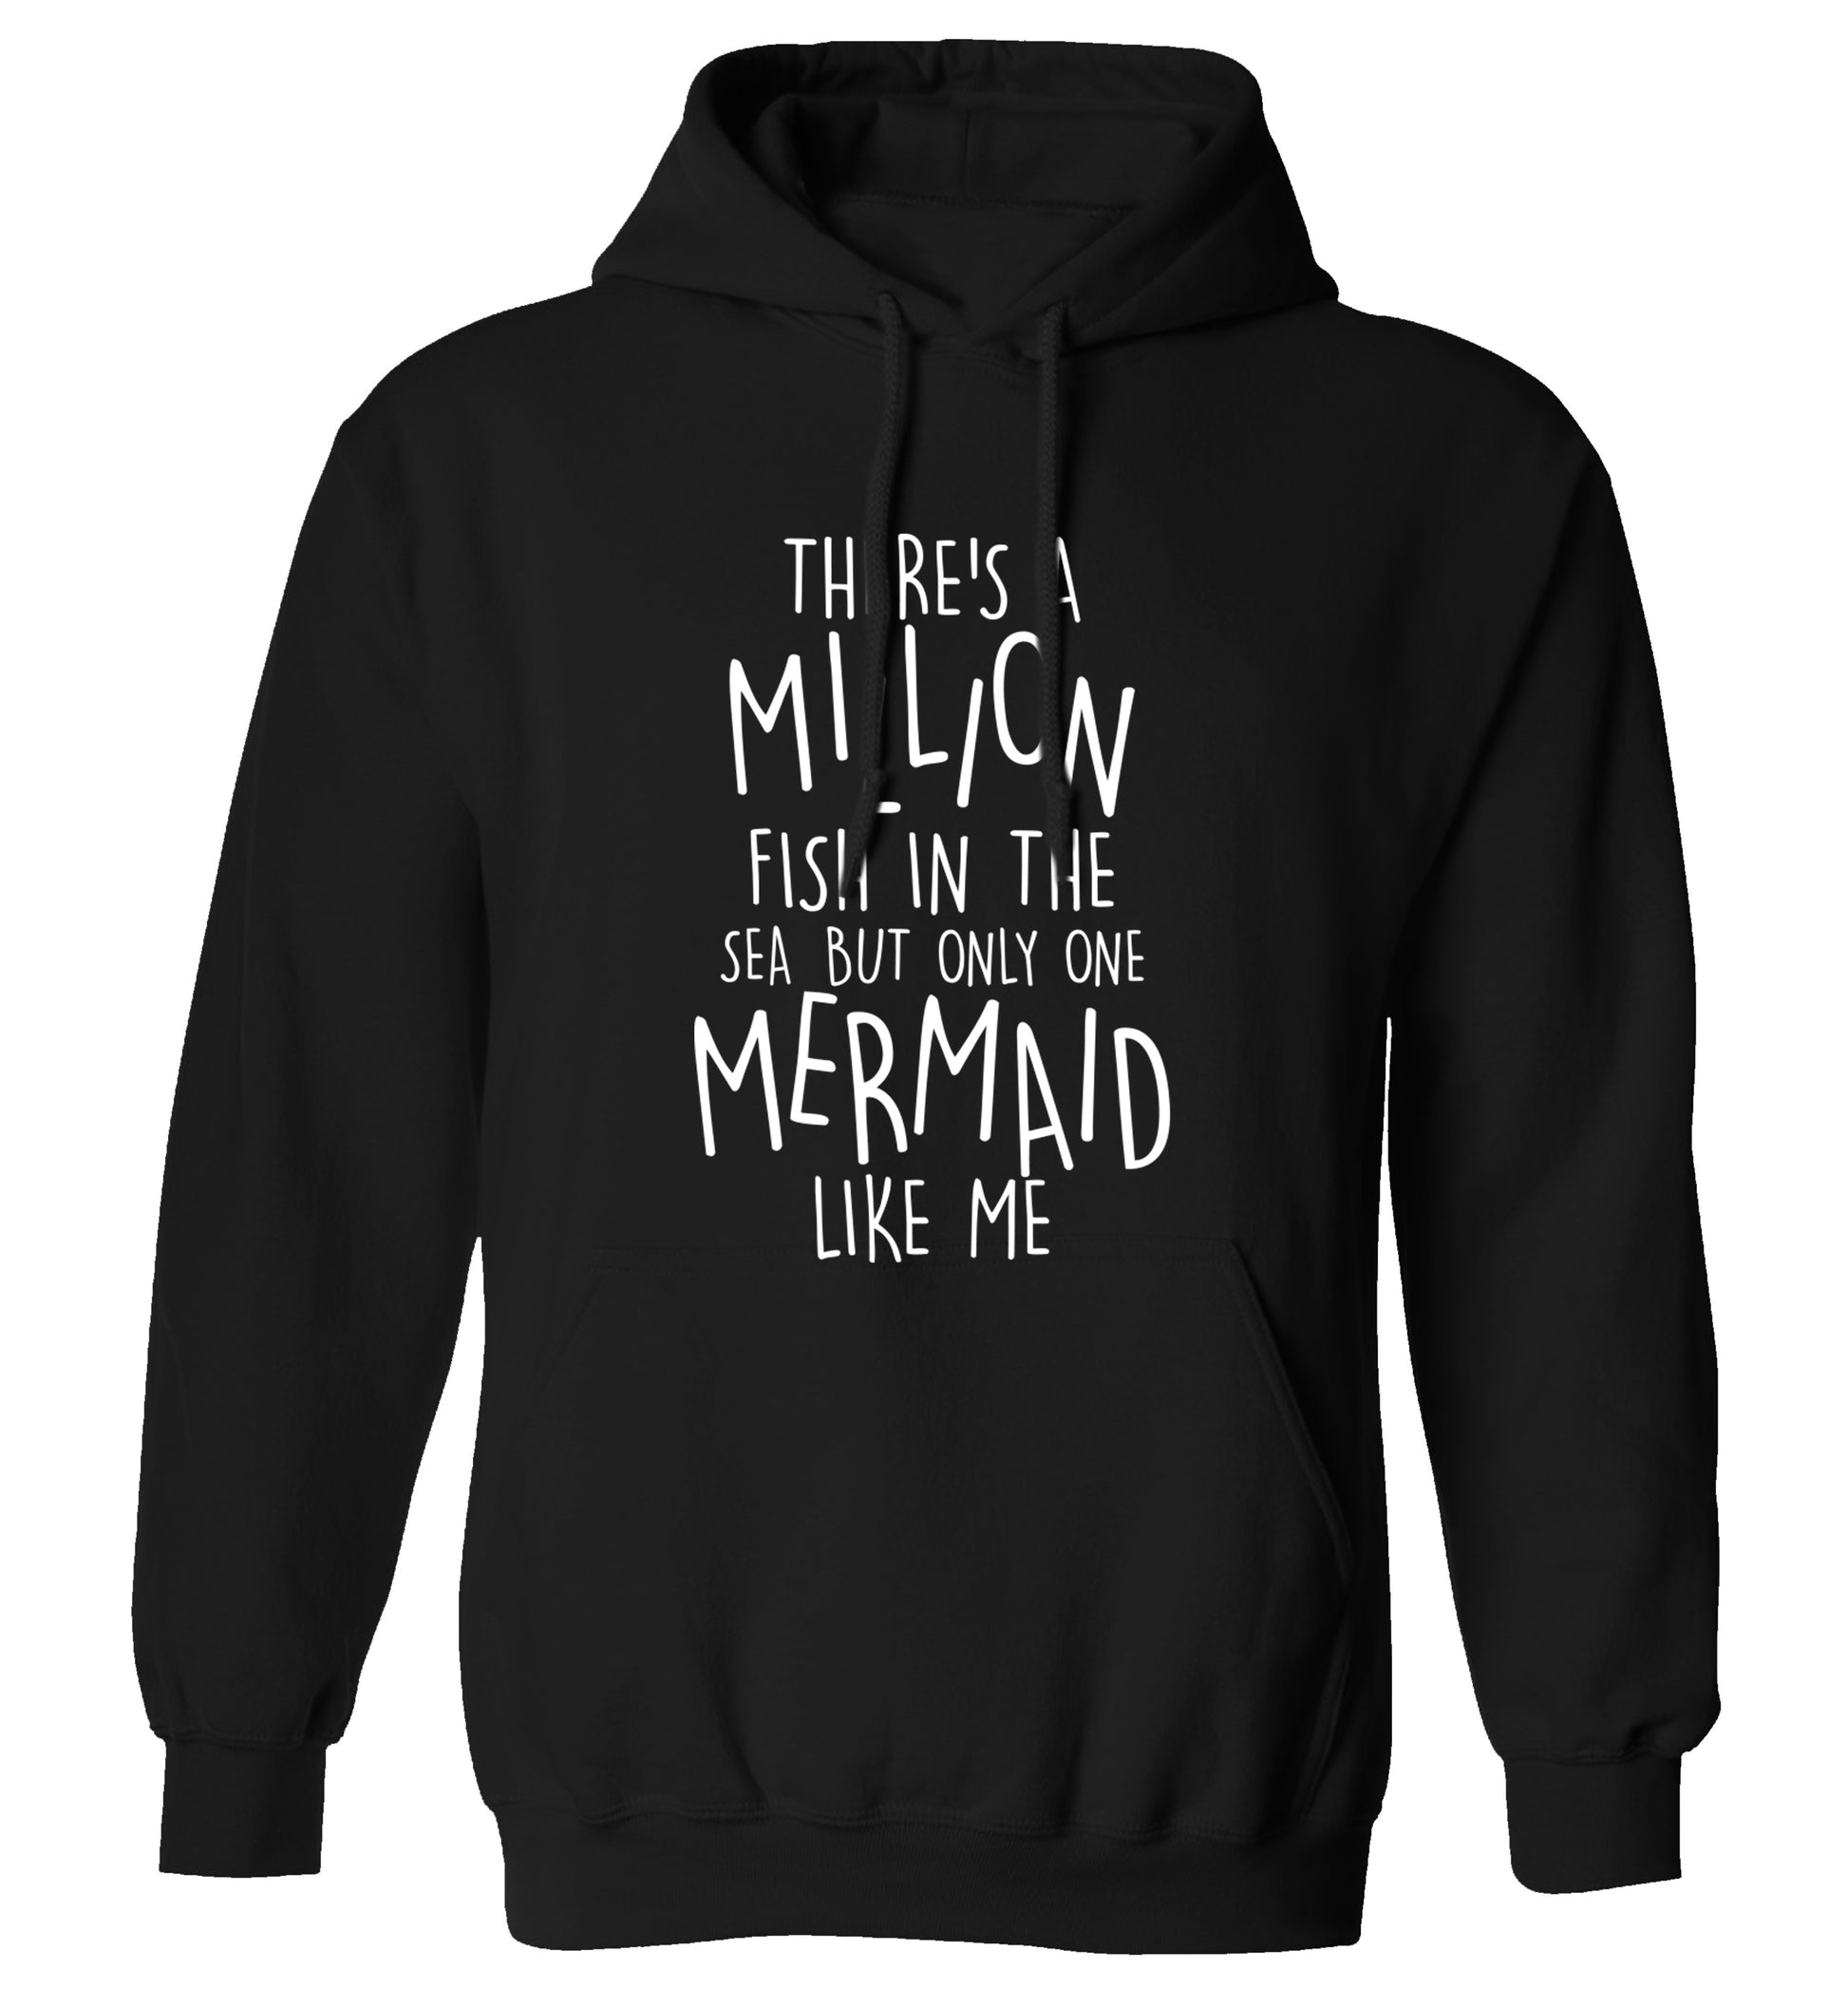 There's a million fish in the sea but only one mermaid like me adults unisex black hoodie 2XL